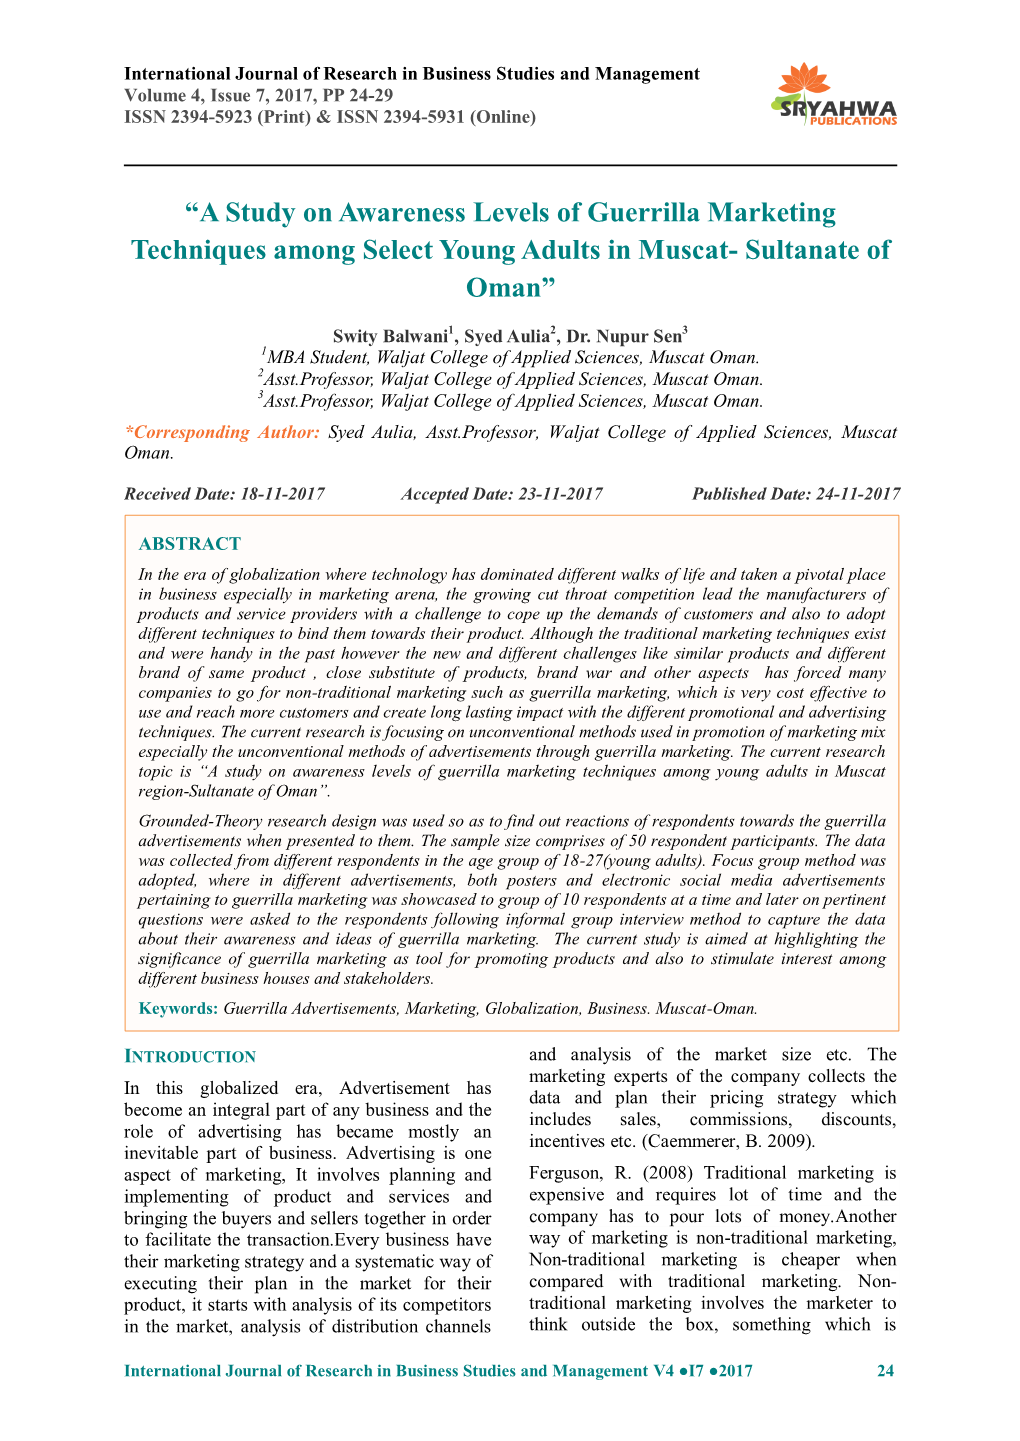 “A Study on Awareness Levels of Guerrilla Marketing Techniques Among Select Young Adults in Muscat- Sultanate of Oman”